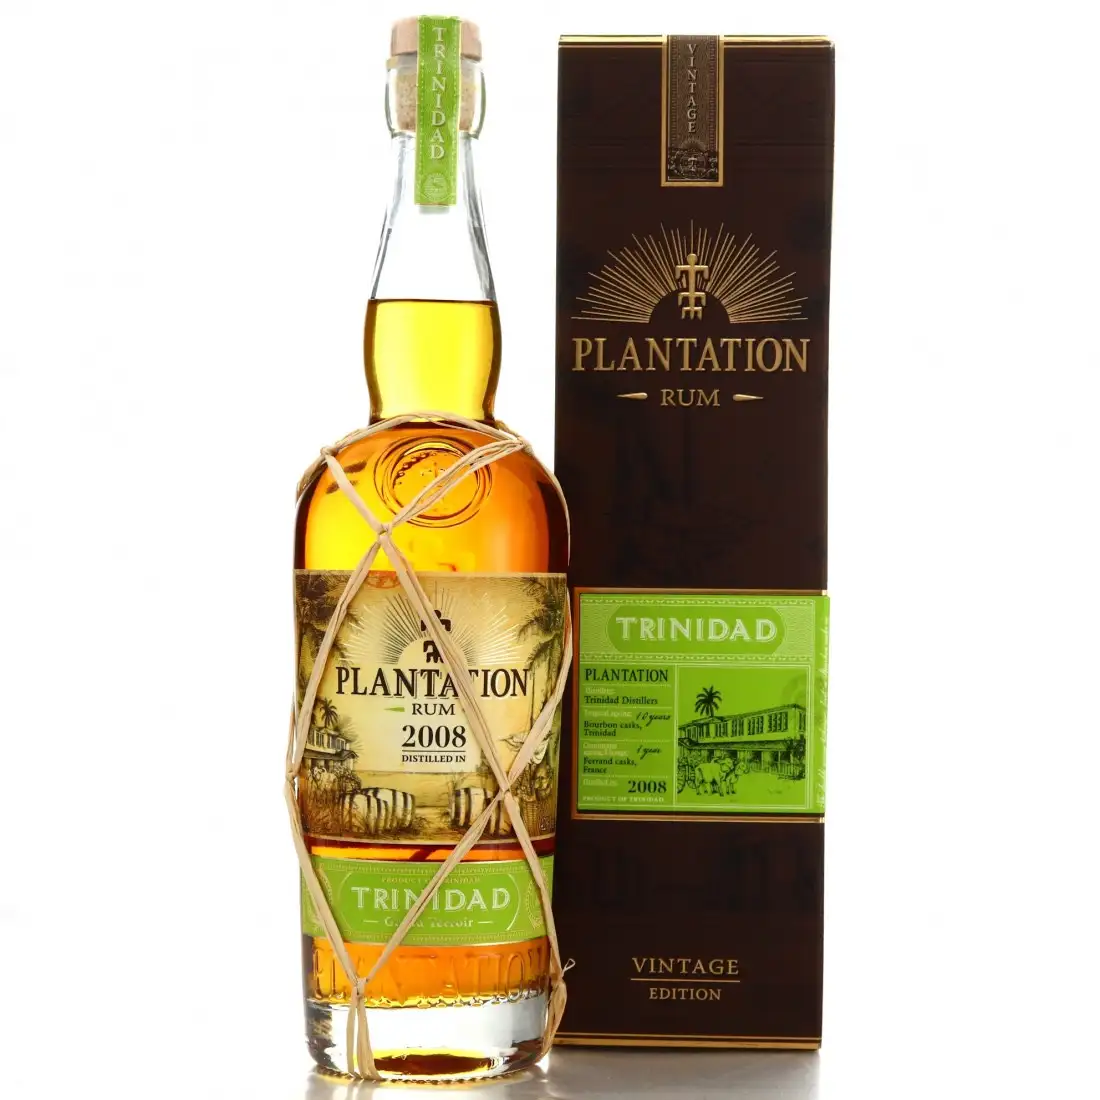 Image of the front of the bottle of the rum Plantation Trinidad Grand Terroir